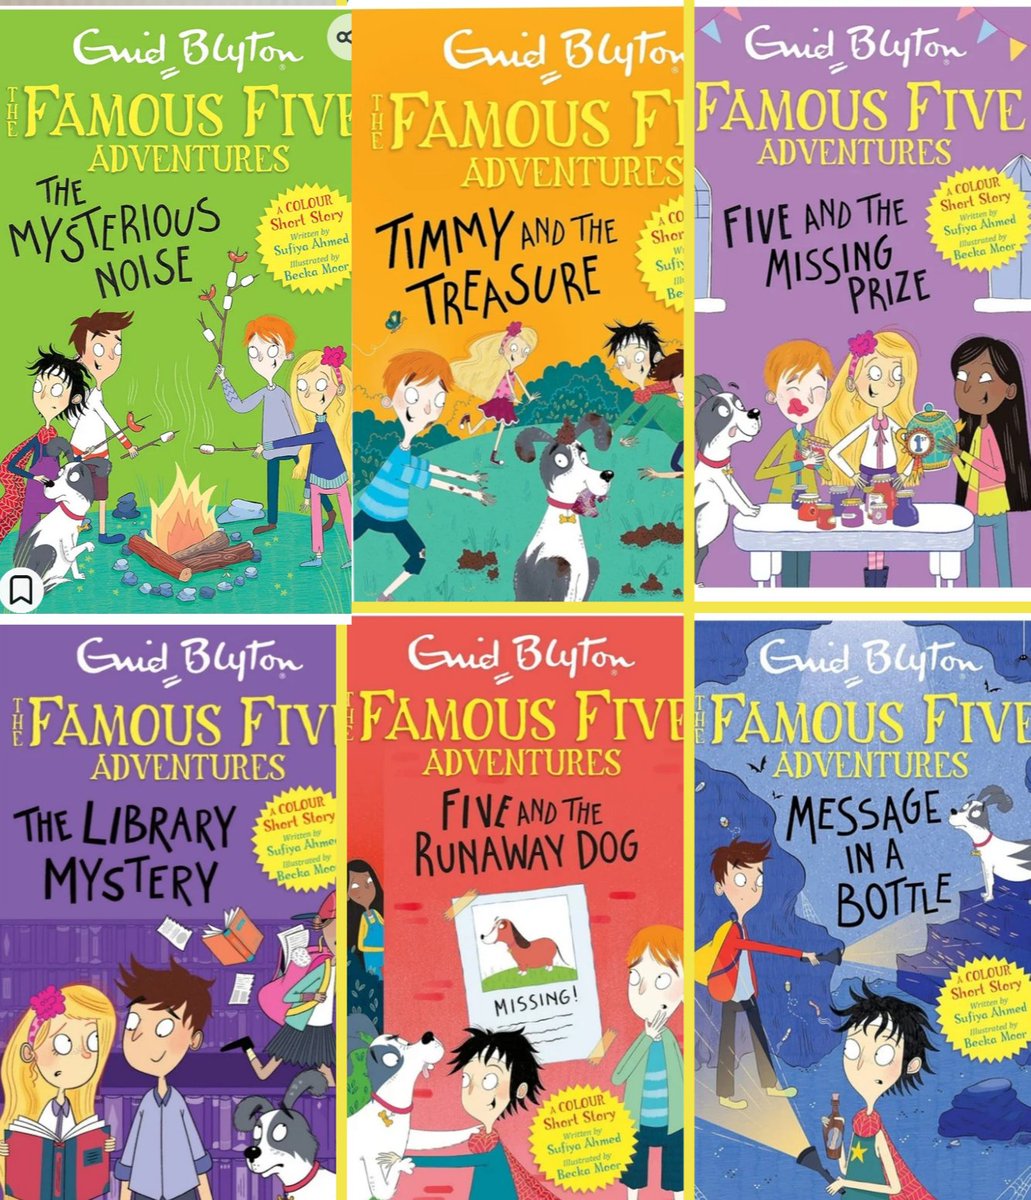 Chuffed to share that my 6th title in my #FamousFive Adventure series is out today. Wonderfully illustrated by #BeckaMoor...The 5 investigate the Library Mystery